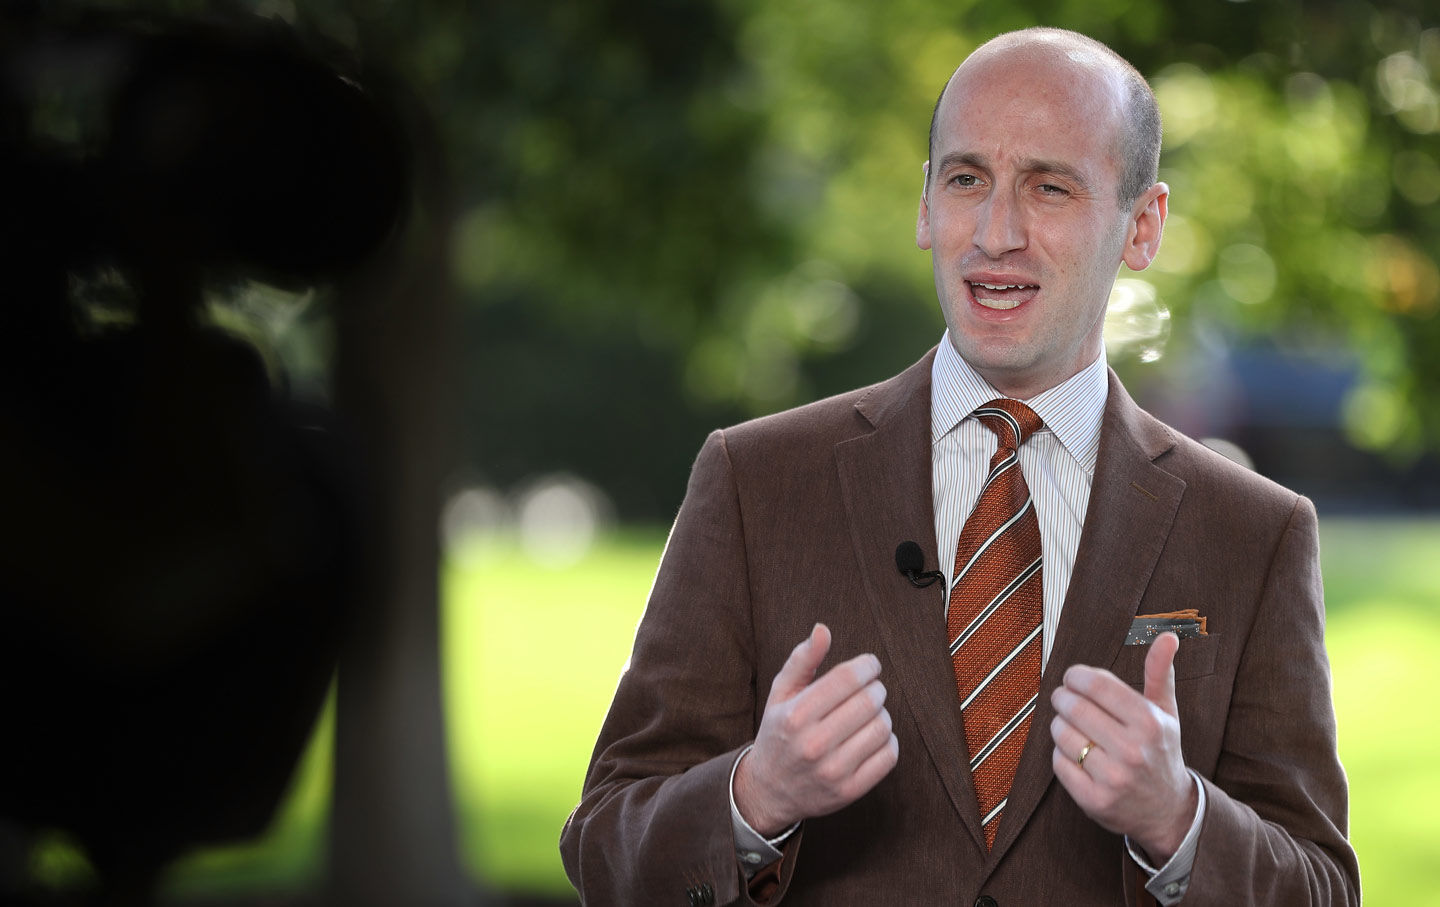 How to Fight White Supremacy by Inverting Stephen Miller’s Playbook